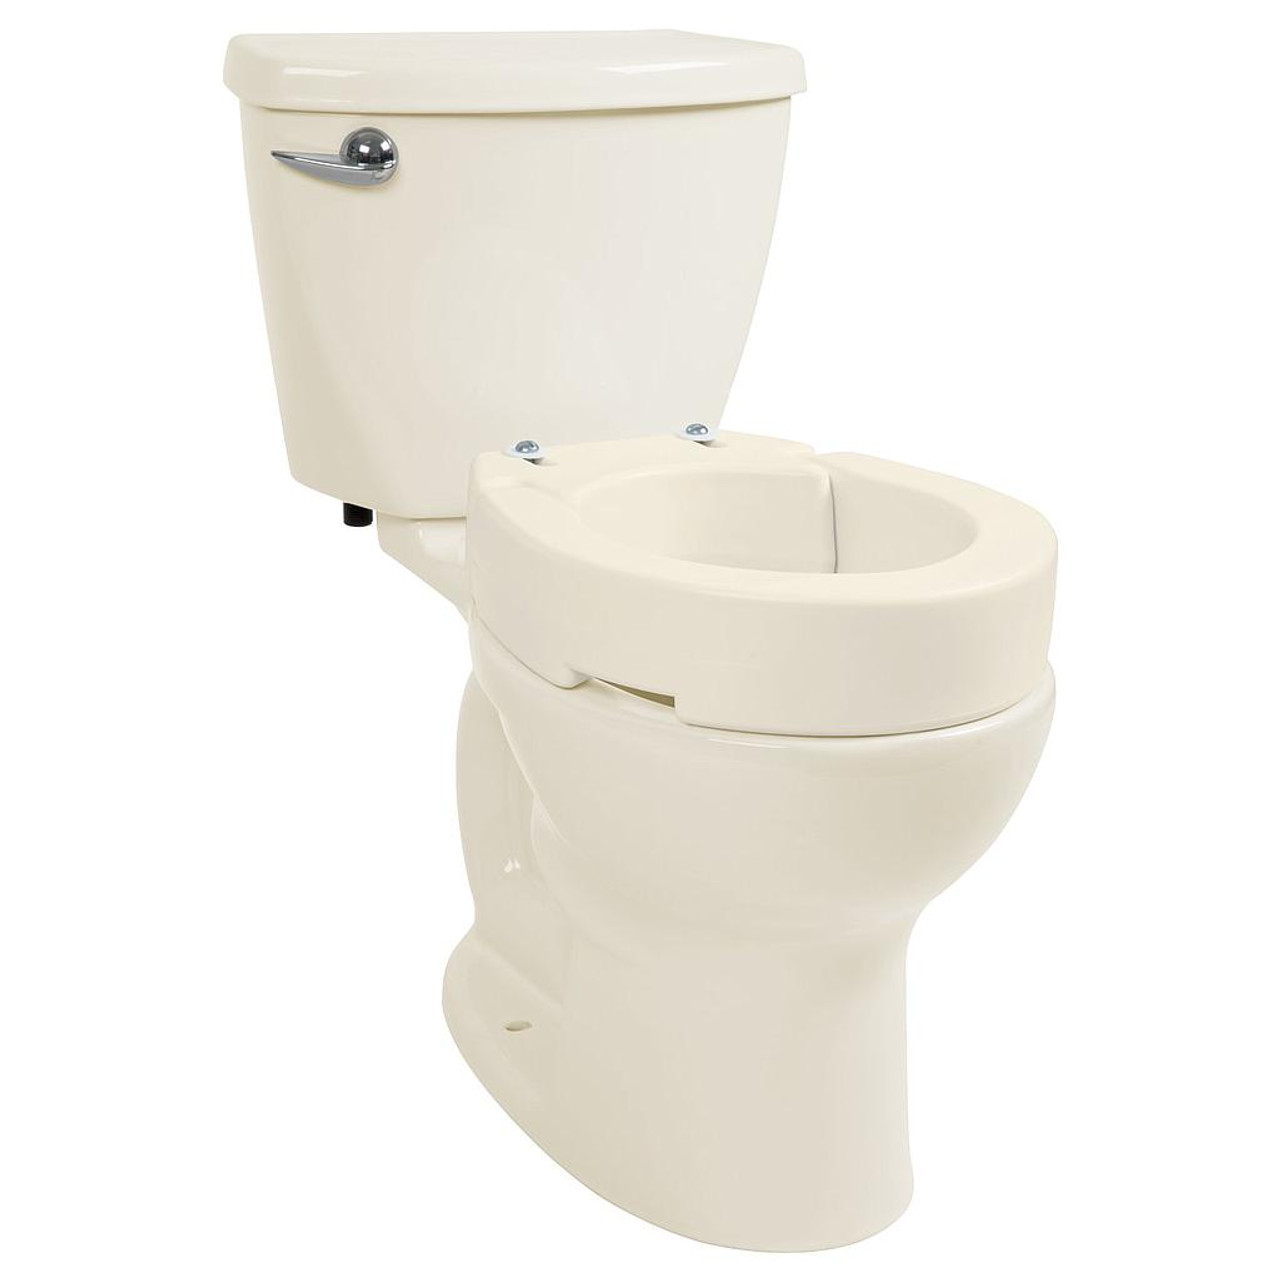 Vive Toilet Seat Riser with Handles